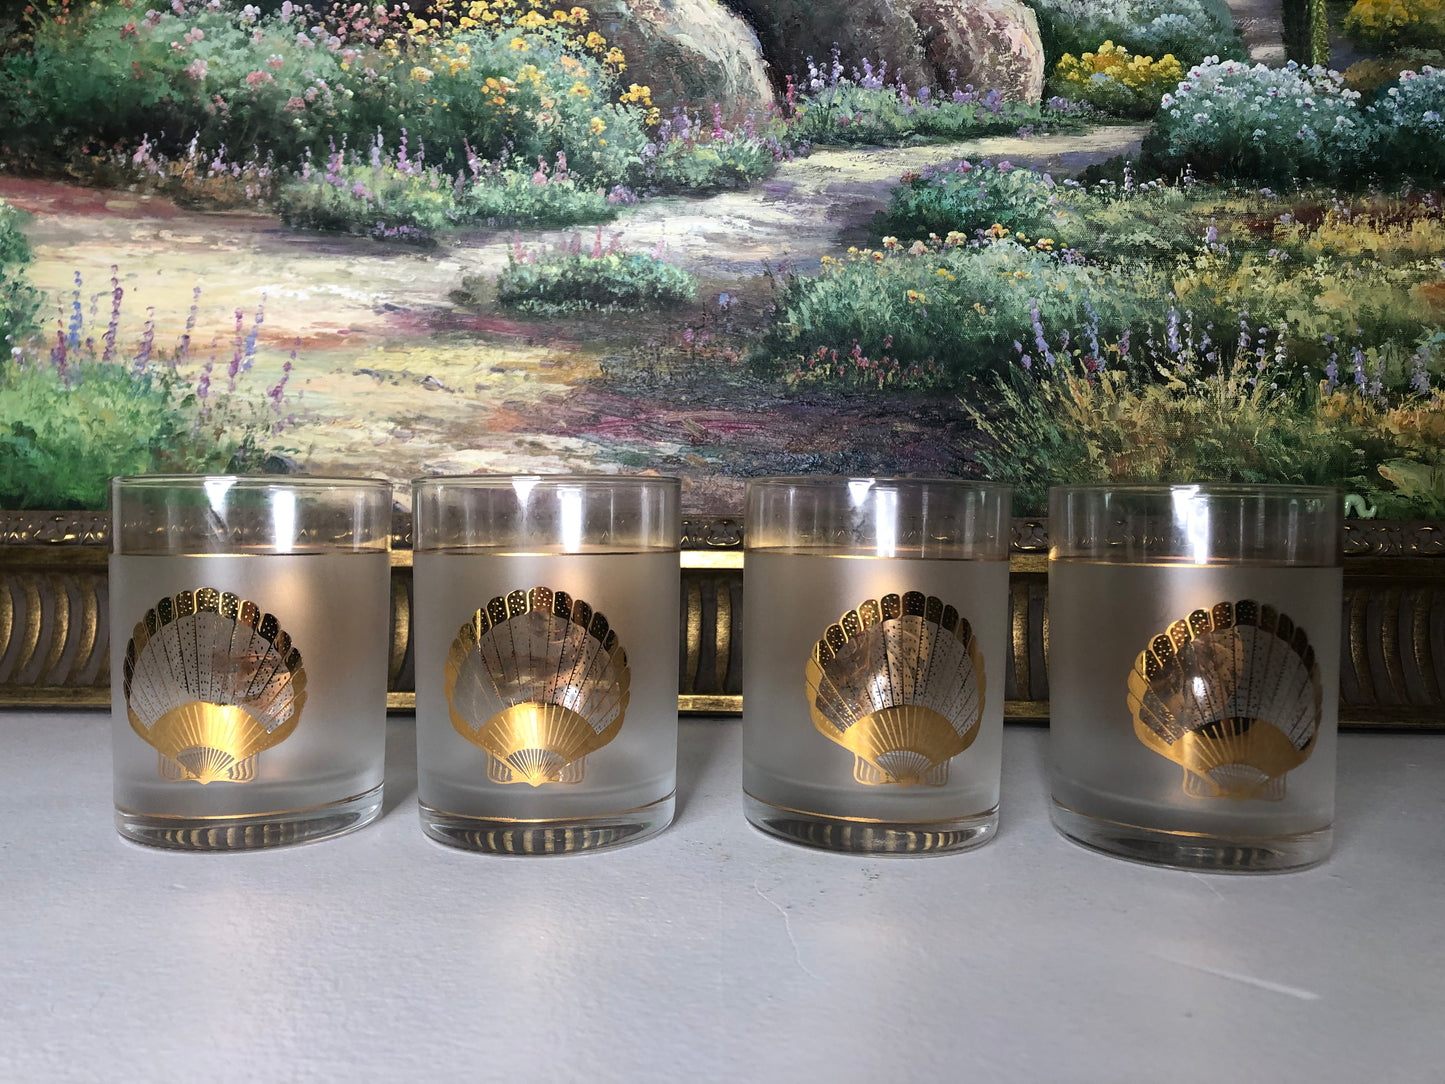 Gorgeous set of Culver frosted shell 24k glasses (set of 4) - Excellent condition!